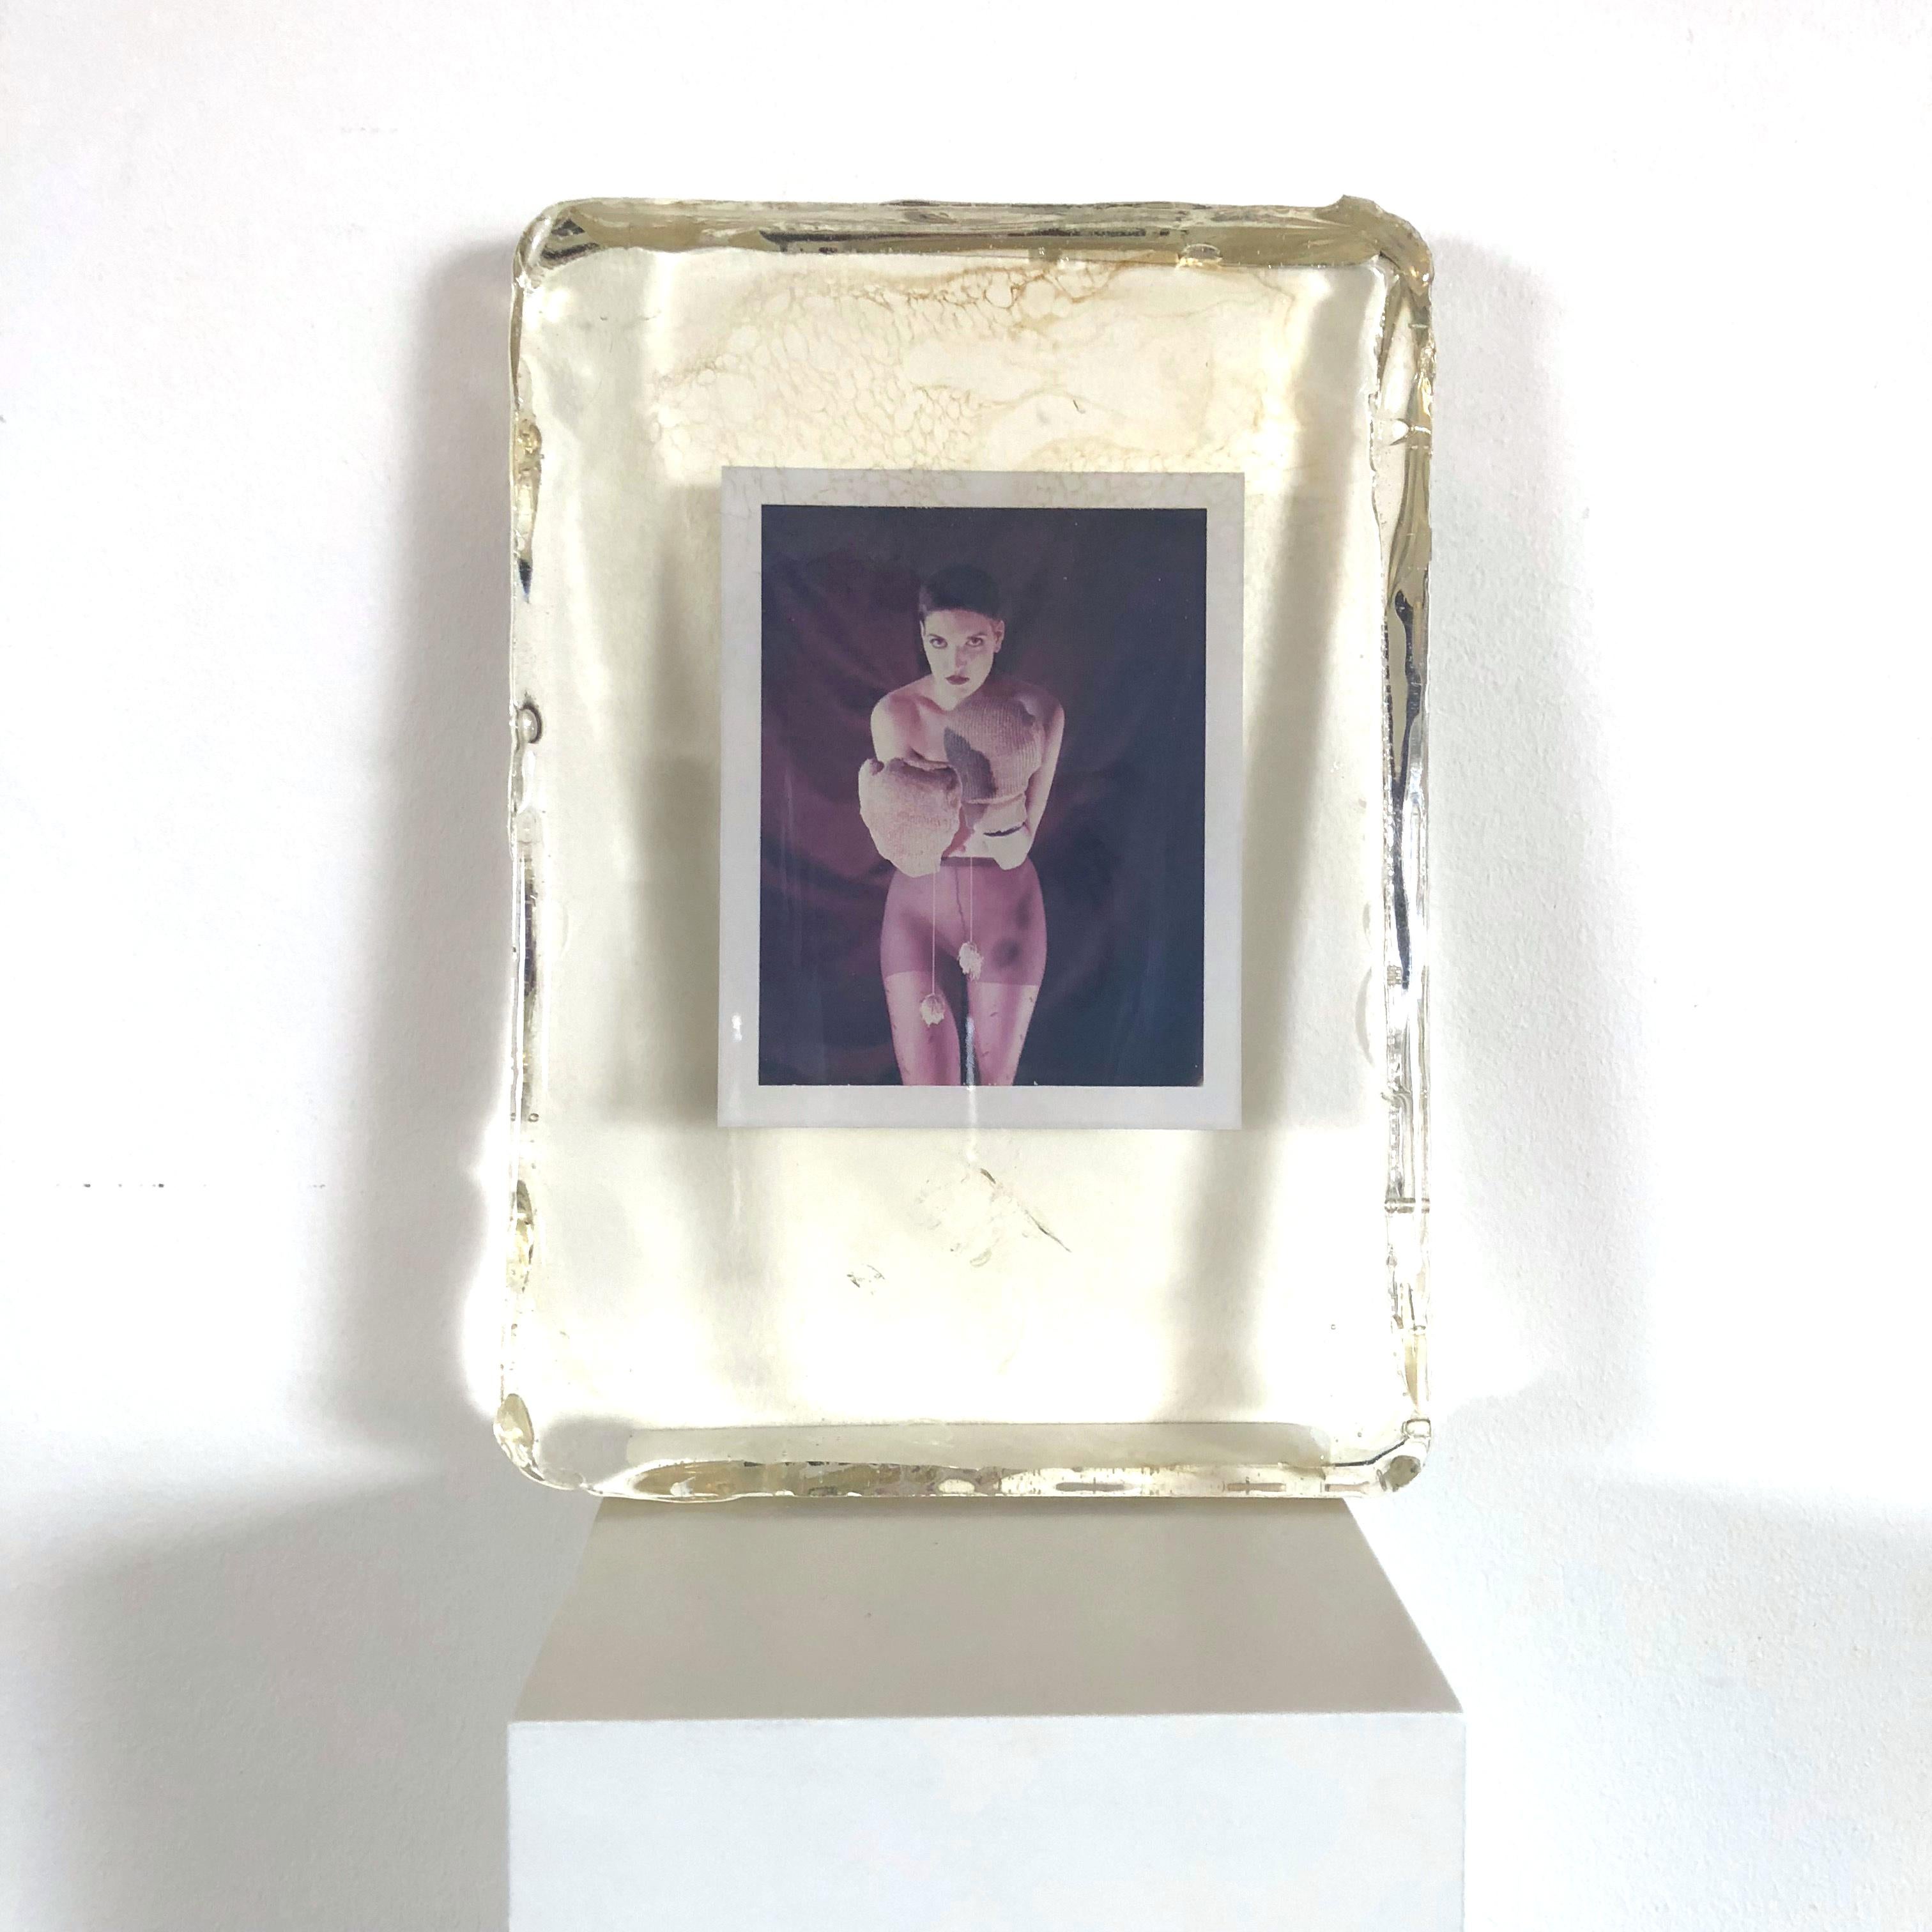 Boxing Elena (Odd Stories)
Original Polaroid.
Hand cast in resin and signed by the artist 
#HS01, 2012, 20x15 x 2cm

Original Polaroid - PIÈCE UNIQUE

Carmen de Vos' Polaroids in Resin will be exhibited at the 